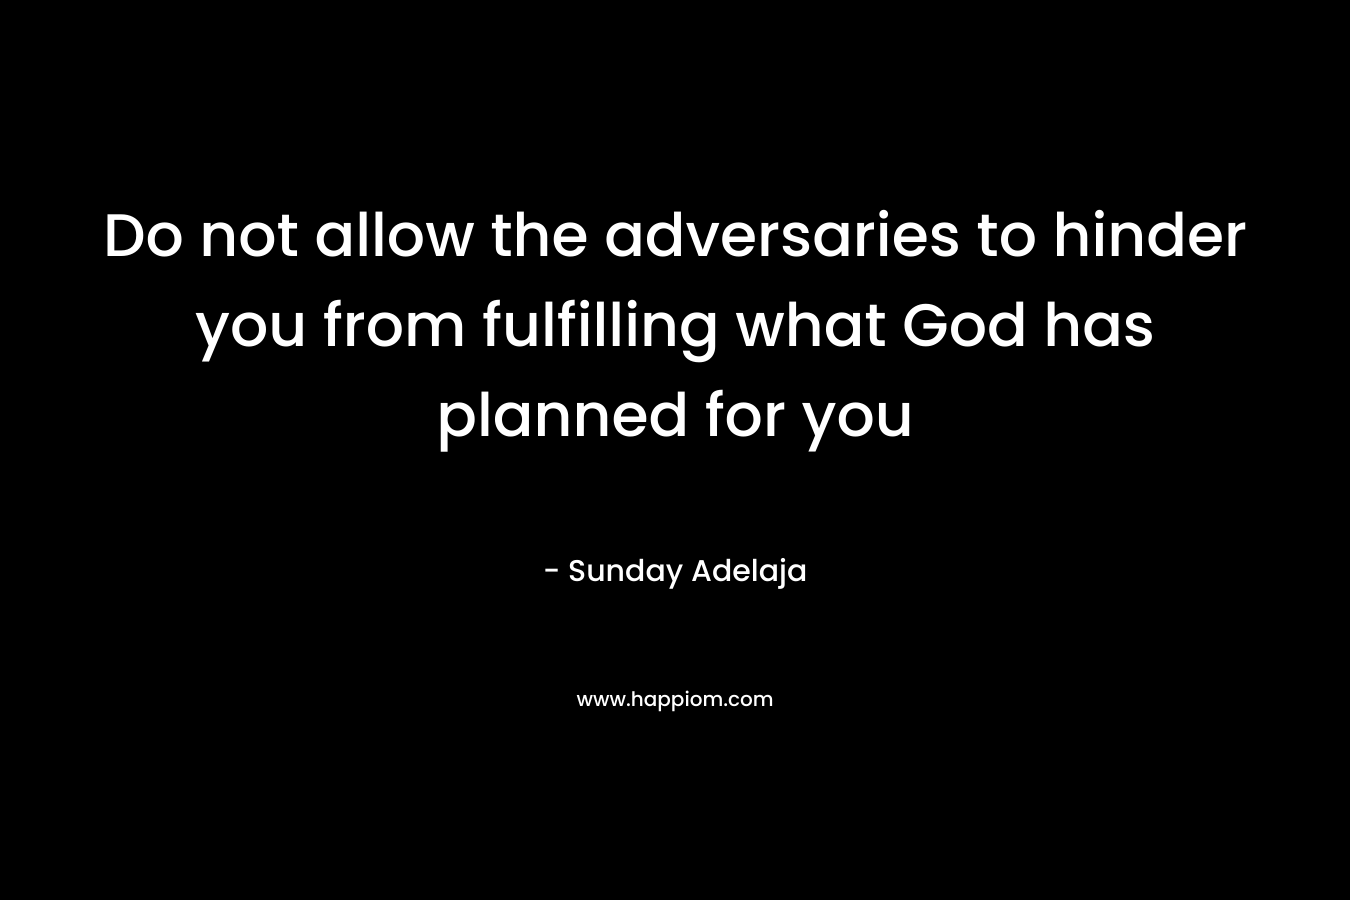 Do not allow the adversaries to hinder you from fulfilling what God has planned for you